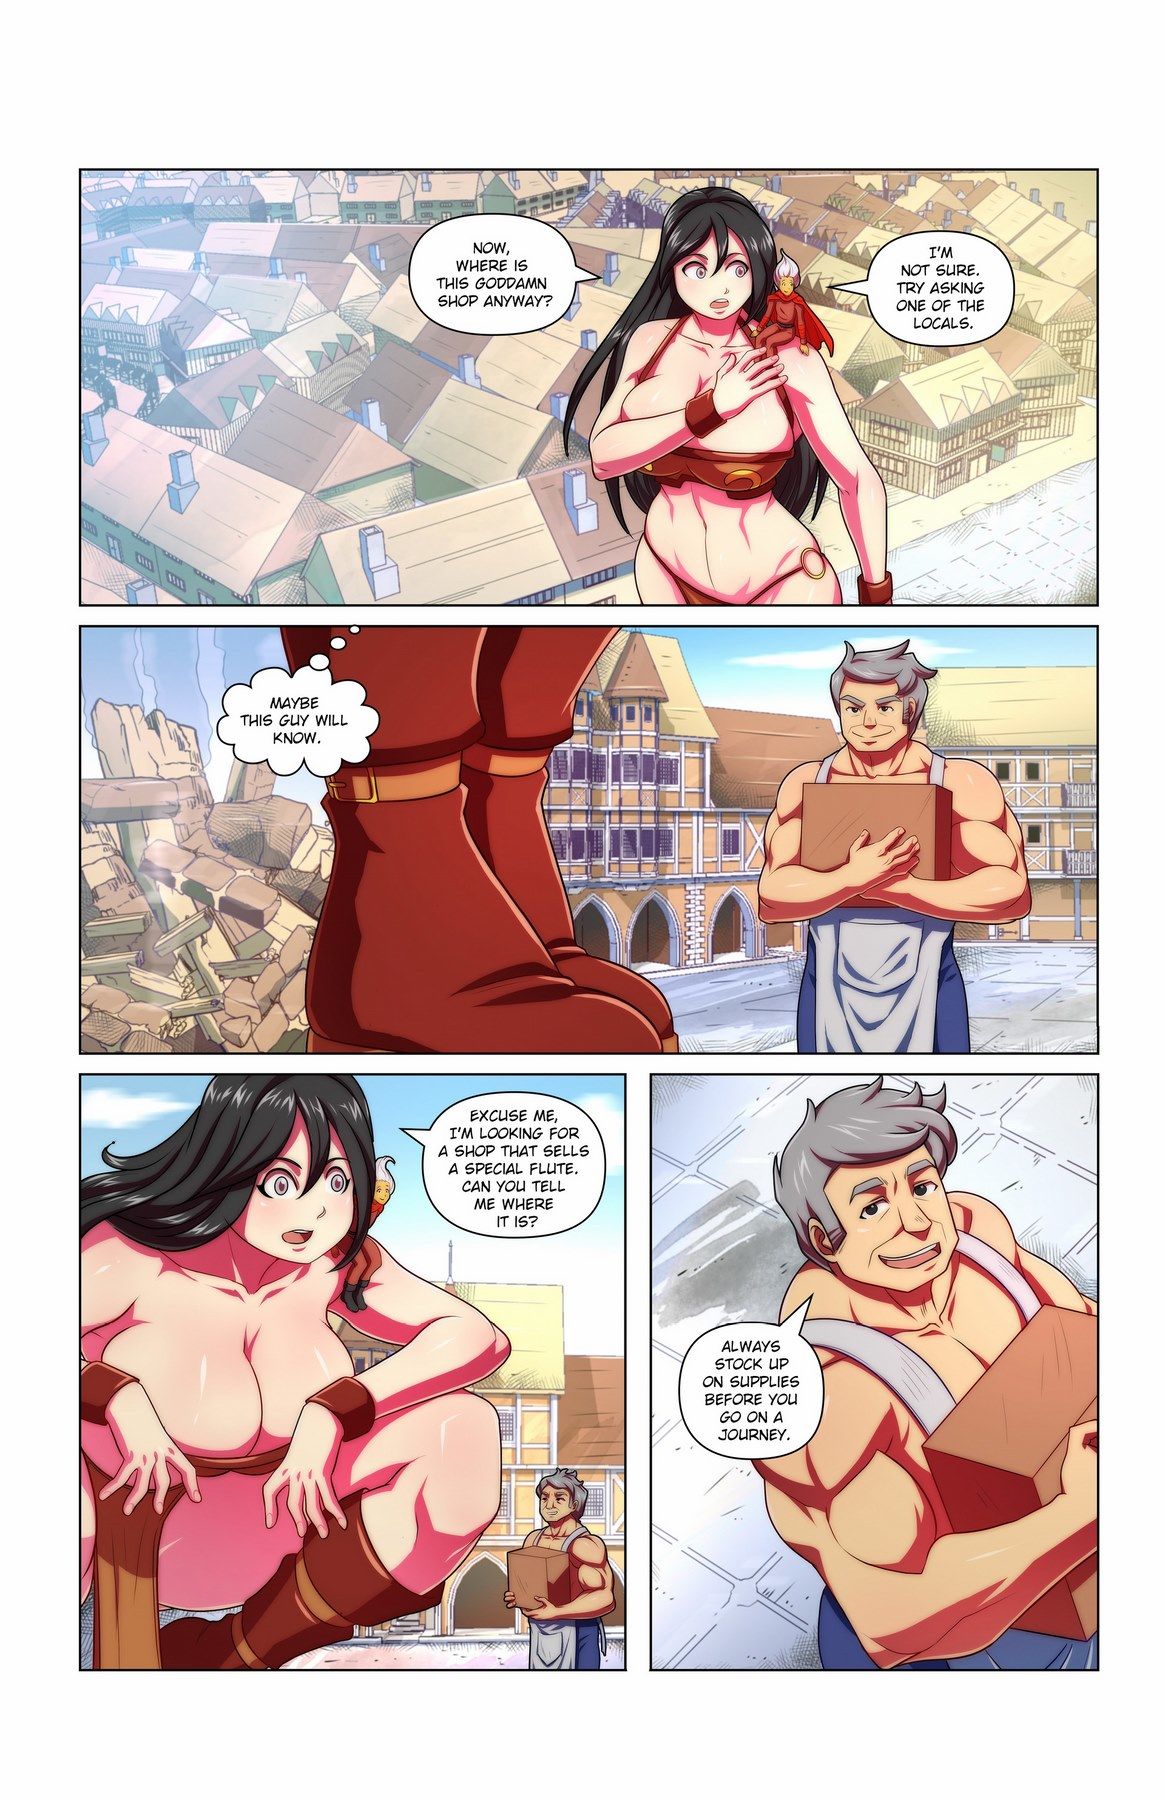 Giantess RPG Issue 2 GiantessFan page 9